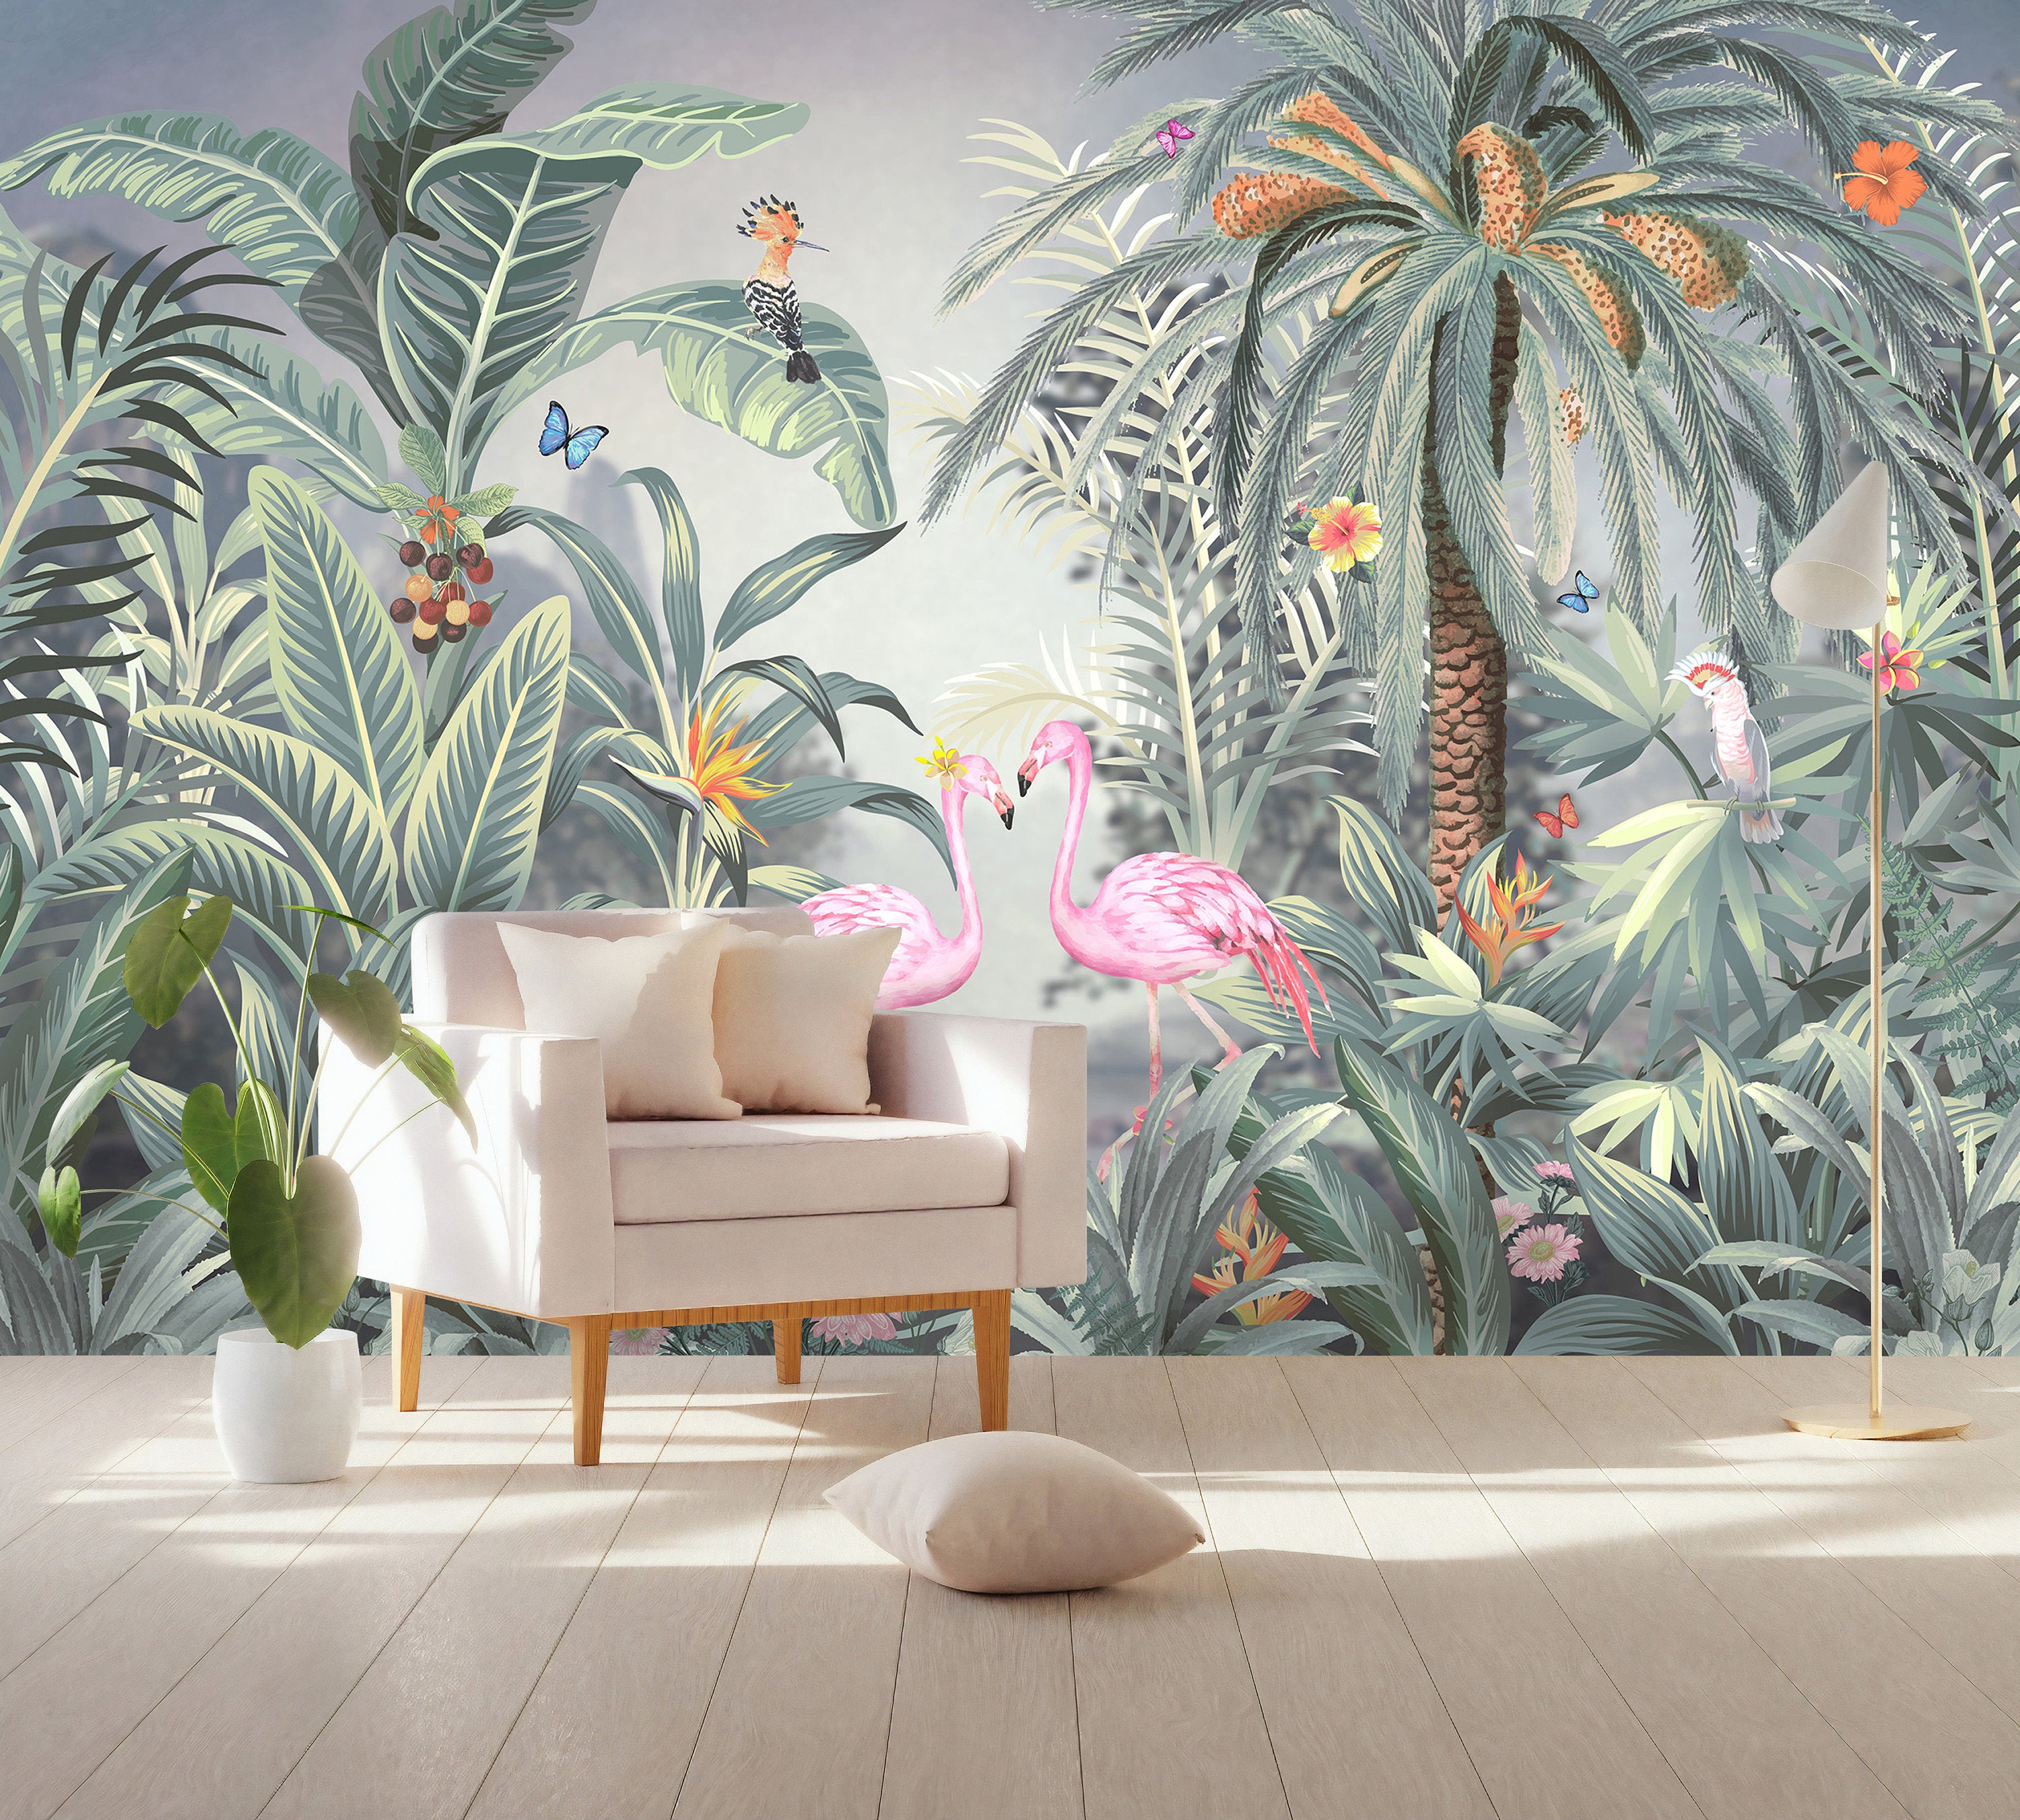 Tropical Jungle Plants Pink Flamingos Exotic Leaves Luxury Wallpaper Self Adhesive Peel and Stick Wall Sticker Wall Decoration Removable